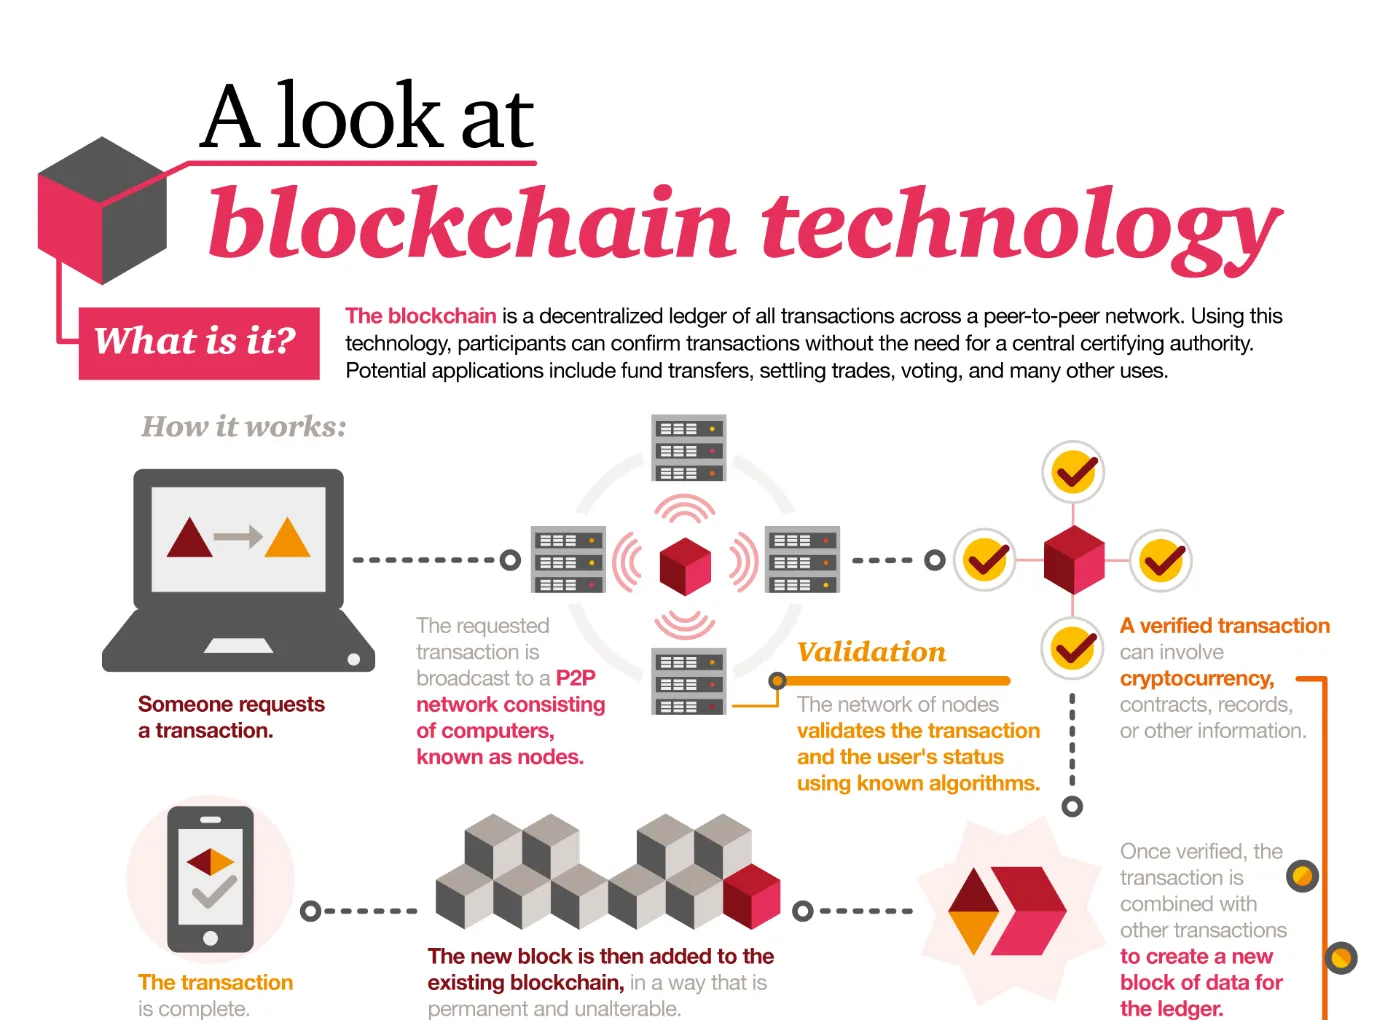 A look at blockchain technology